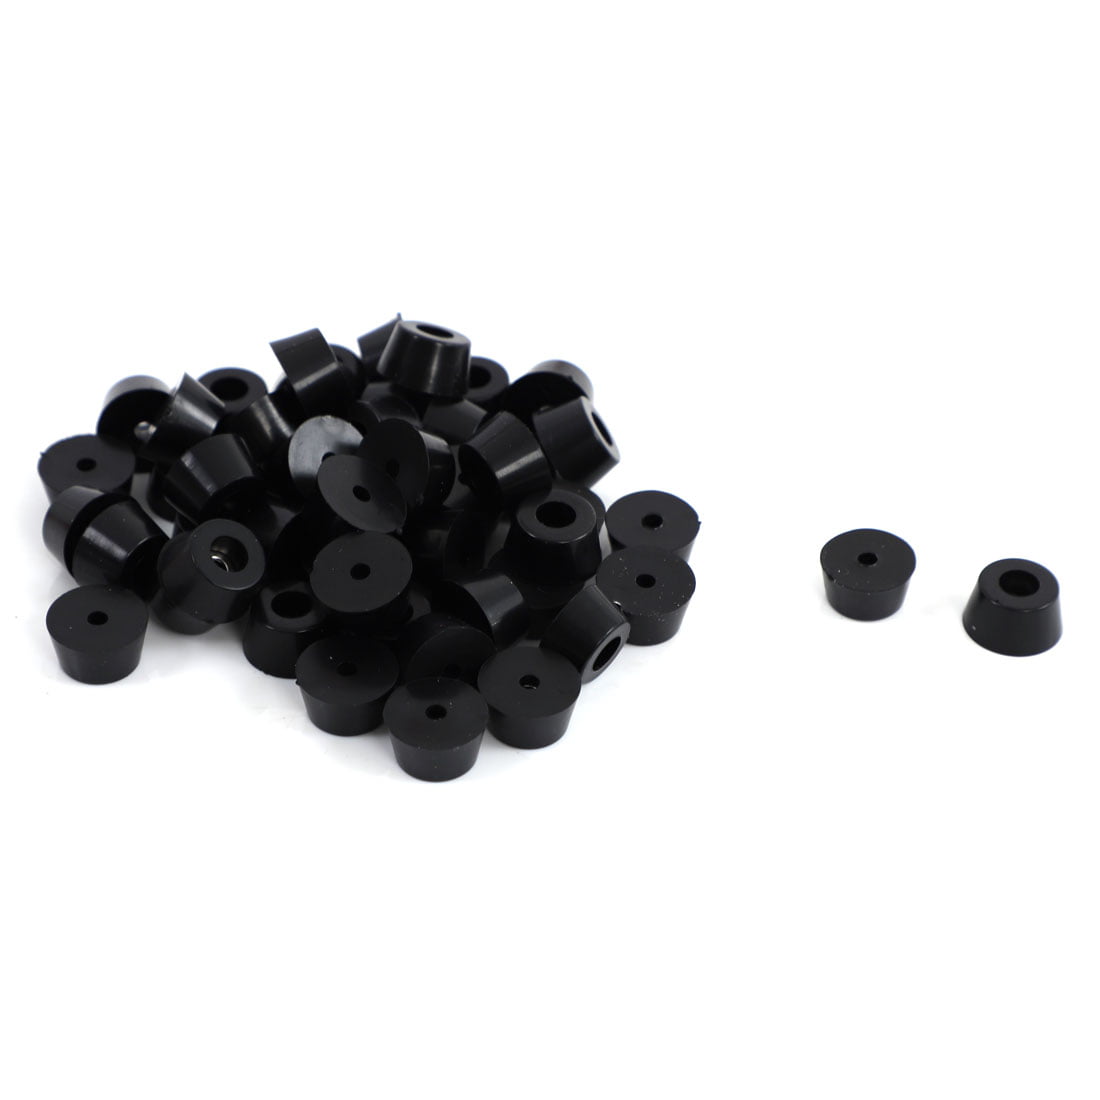 Seat Furniture Rubber Buffer Pads Black 3/4 Inch 19Mm WC *Pack of 10 Toilet 